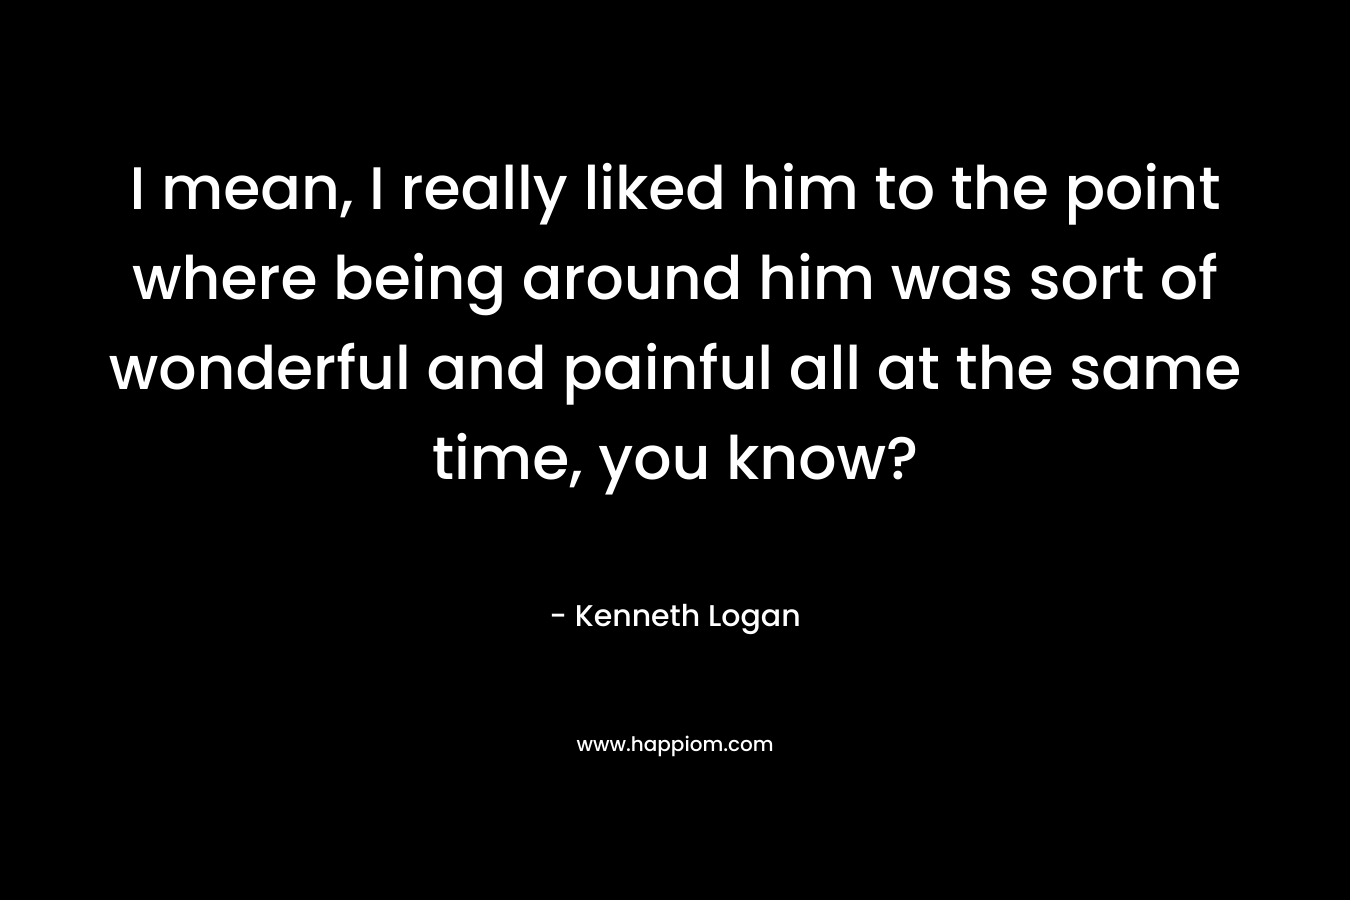 I mean, I really liked him to the point where being around him was sort of wonderful and painful all at the same time, you know? – Kenneth Logan